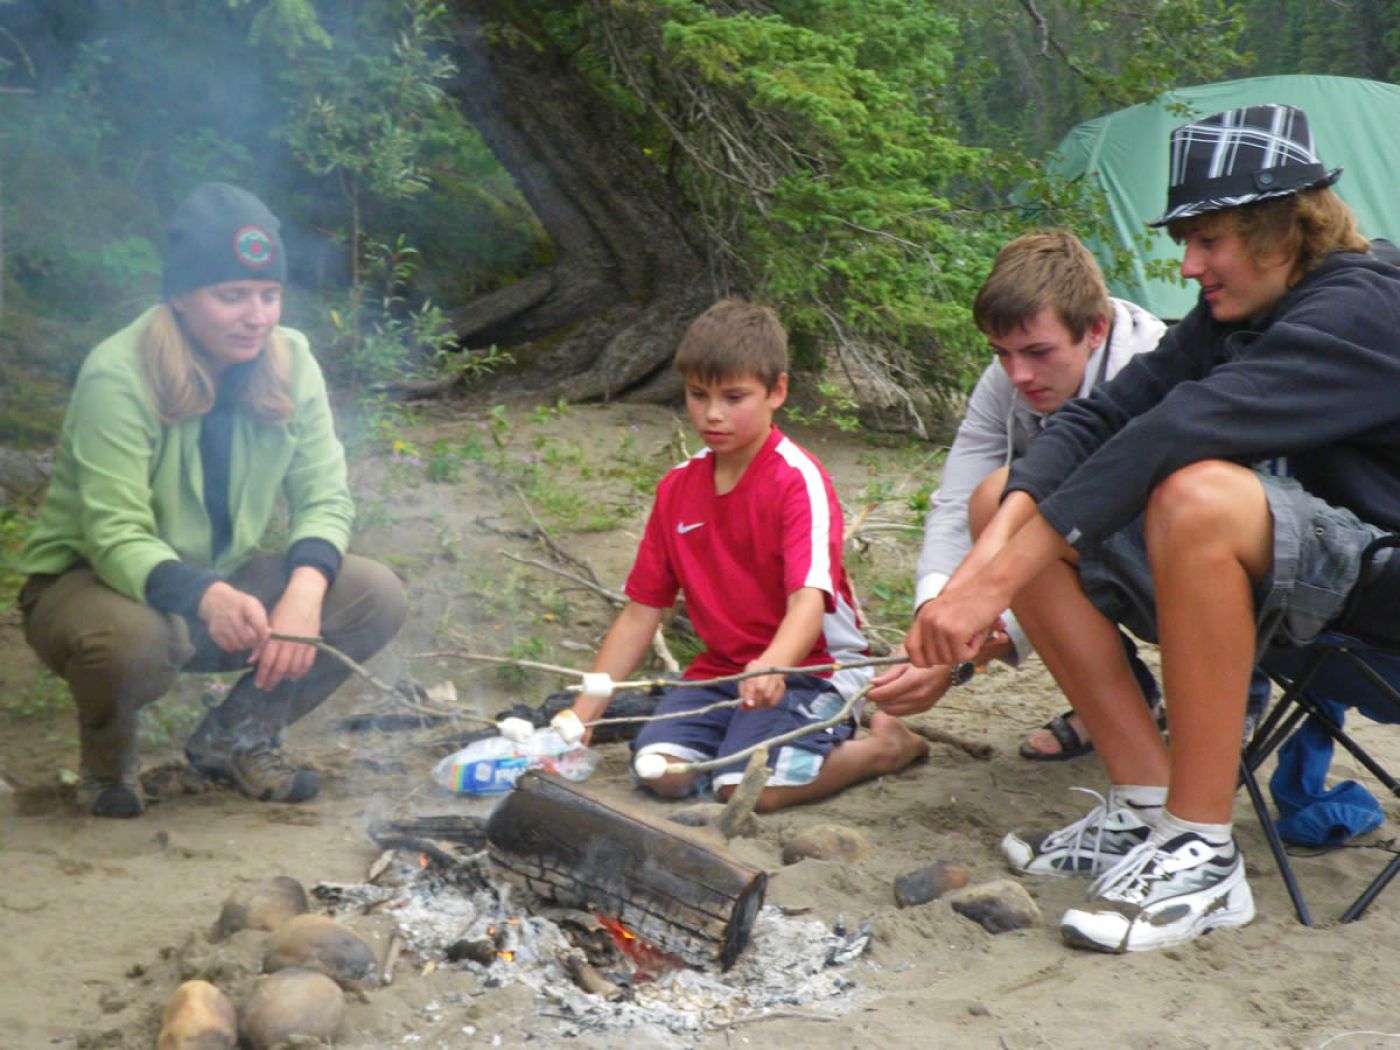 family with children and teenagers at camp fire | familie mit kindern und teenagers am lagerfeuer